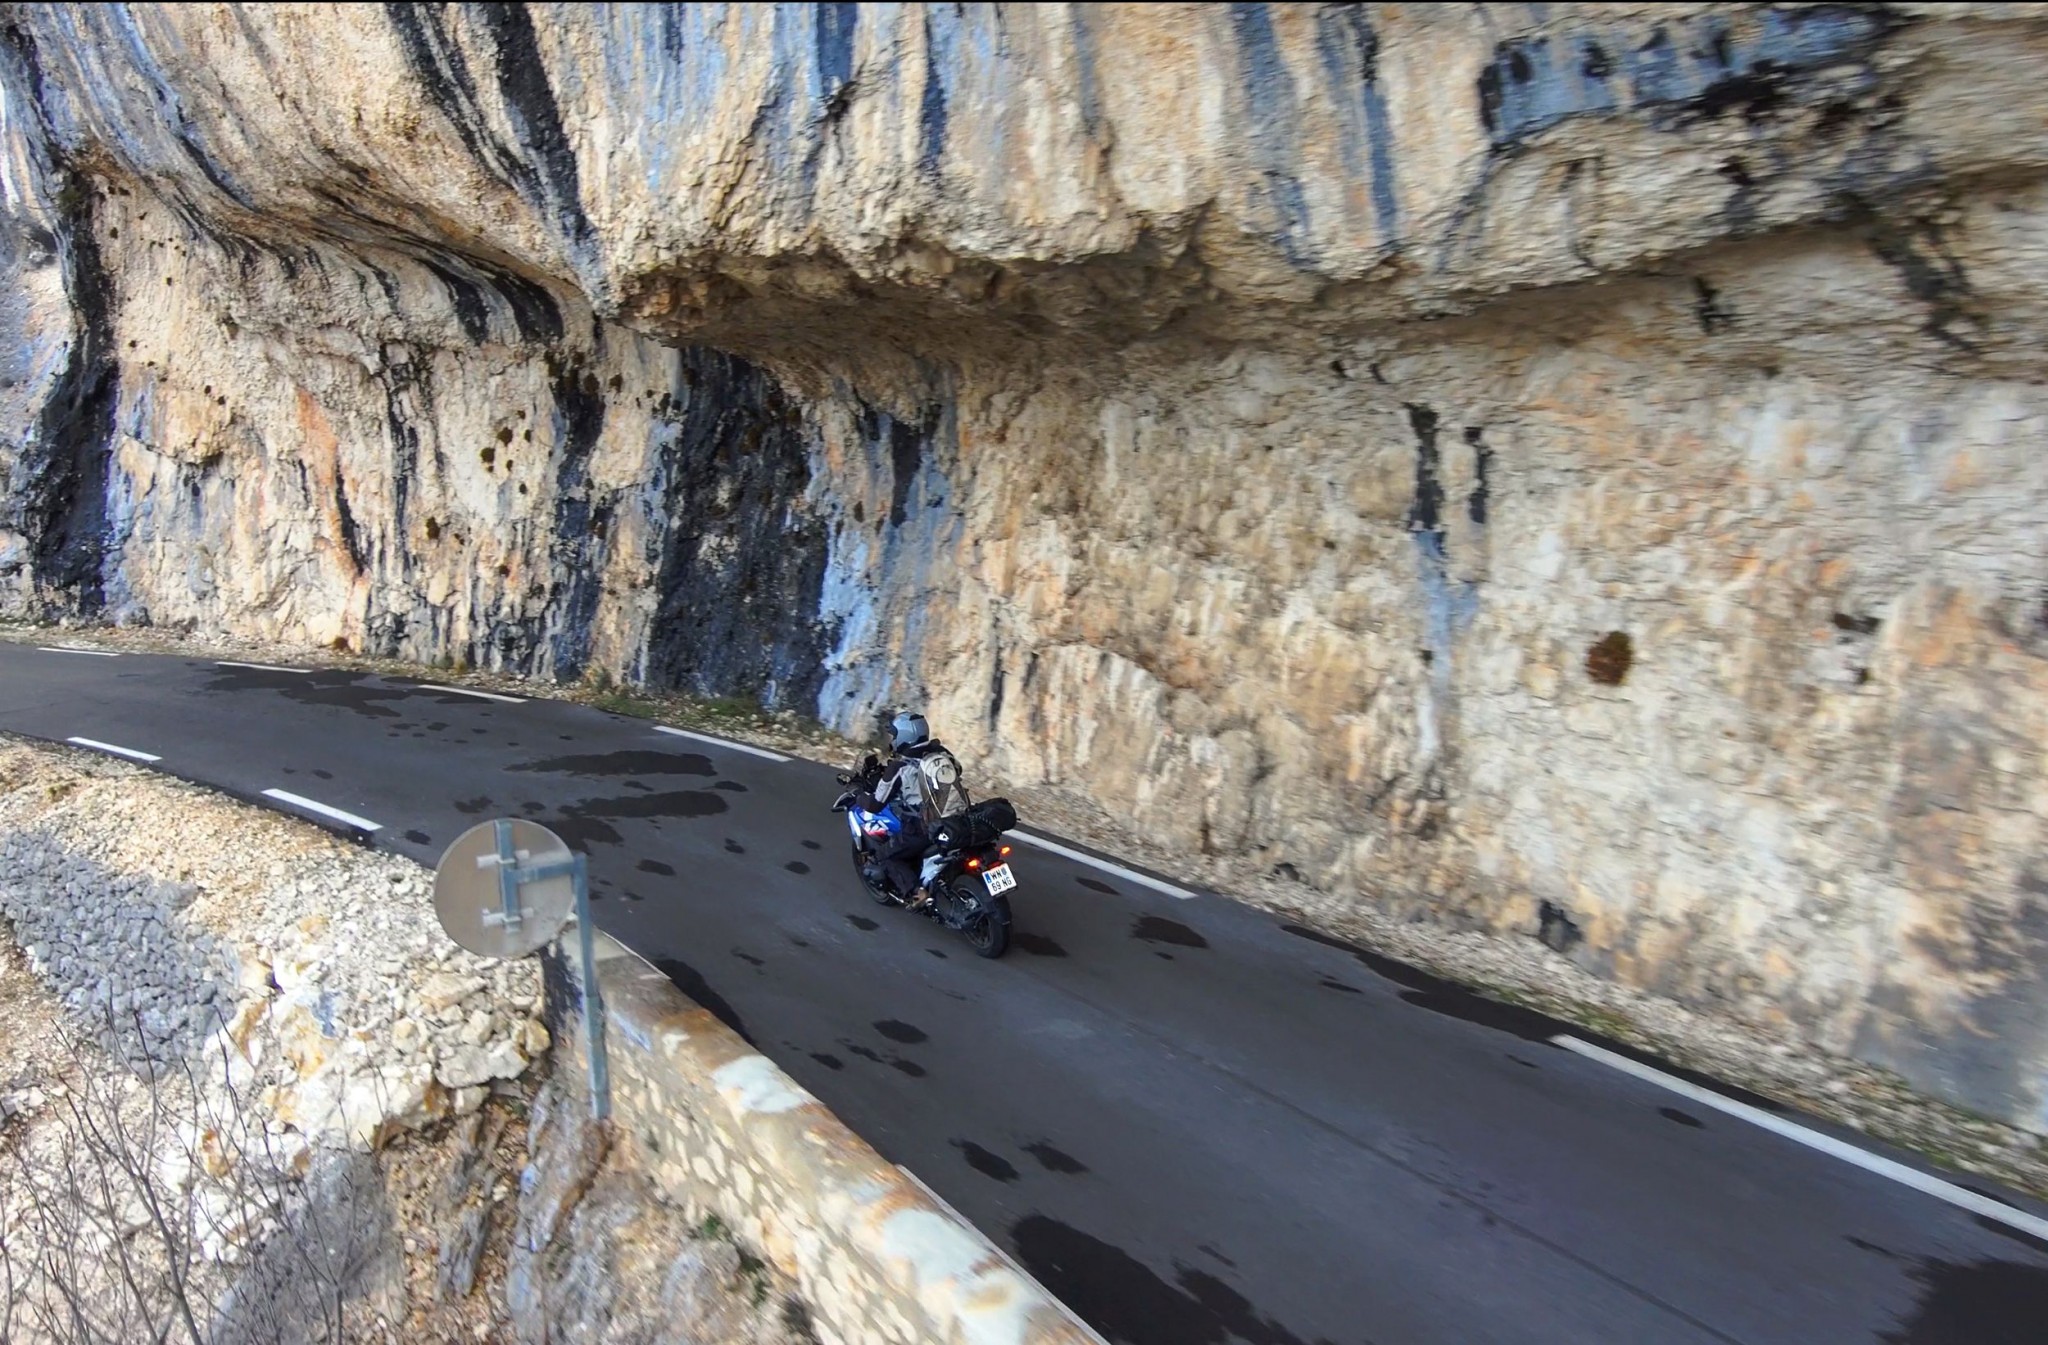 BMW R 1300 GS road test - from Barcelona to Vienna - Image 33